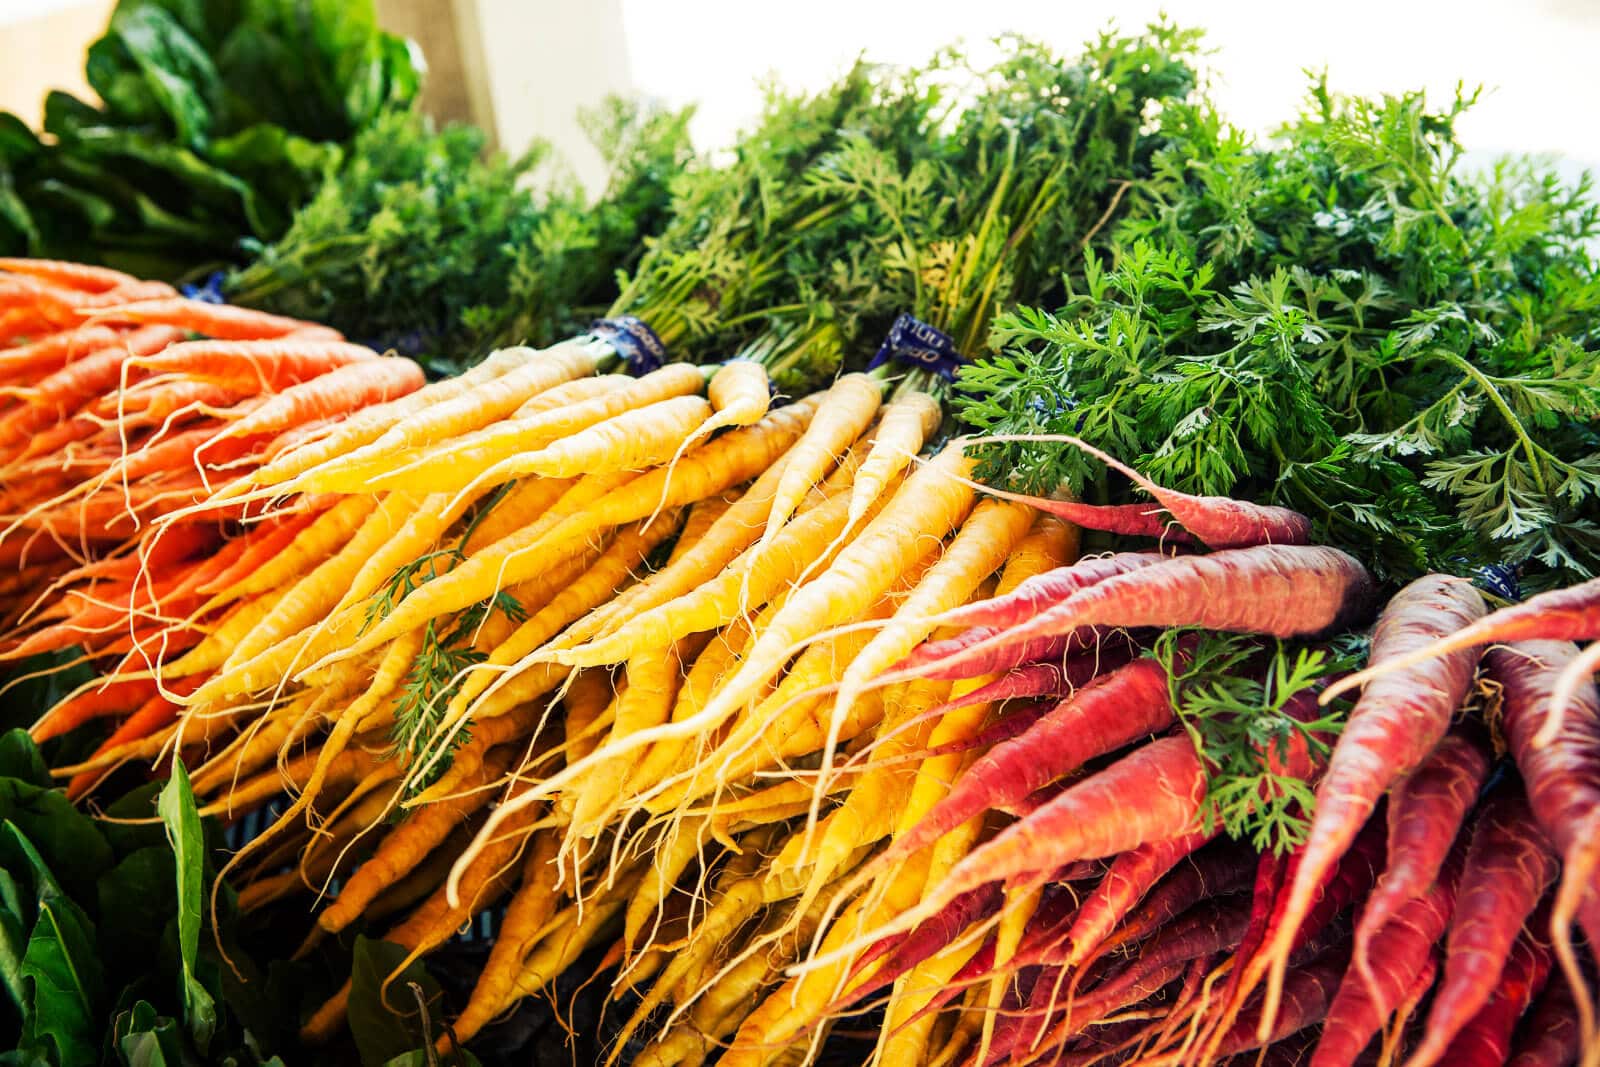 Buy carrot tops from the farmers market for the best quality and flavor